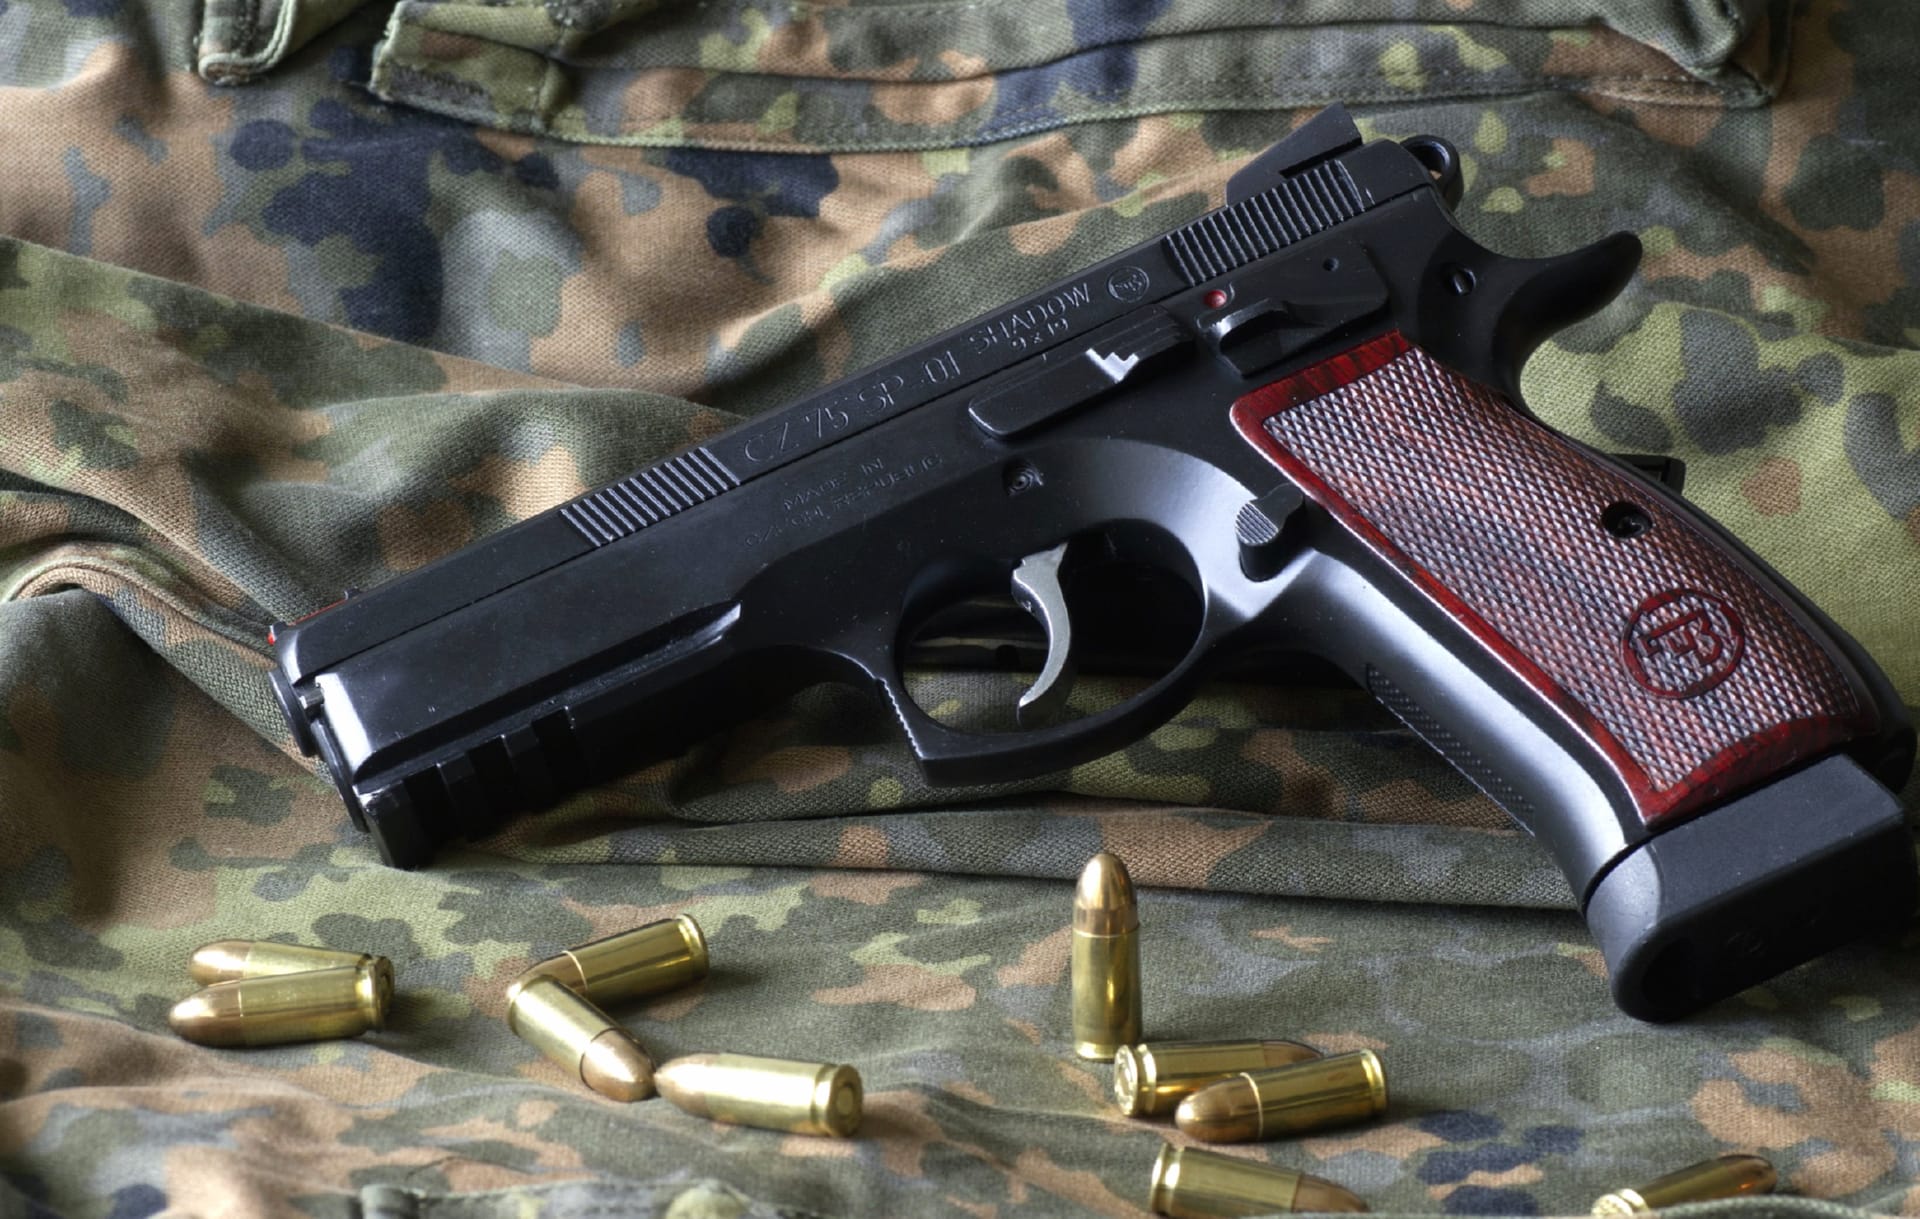 Cz 75 Sp01 Shadow Target Pistol wallpapers HD quality